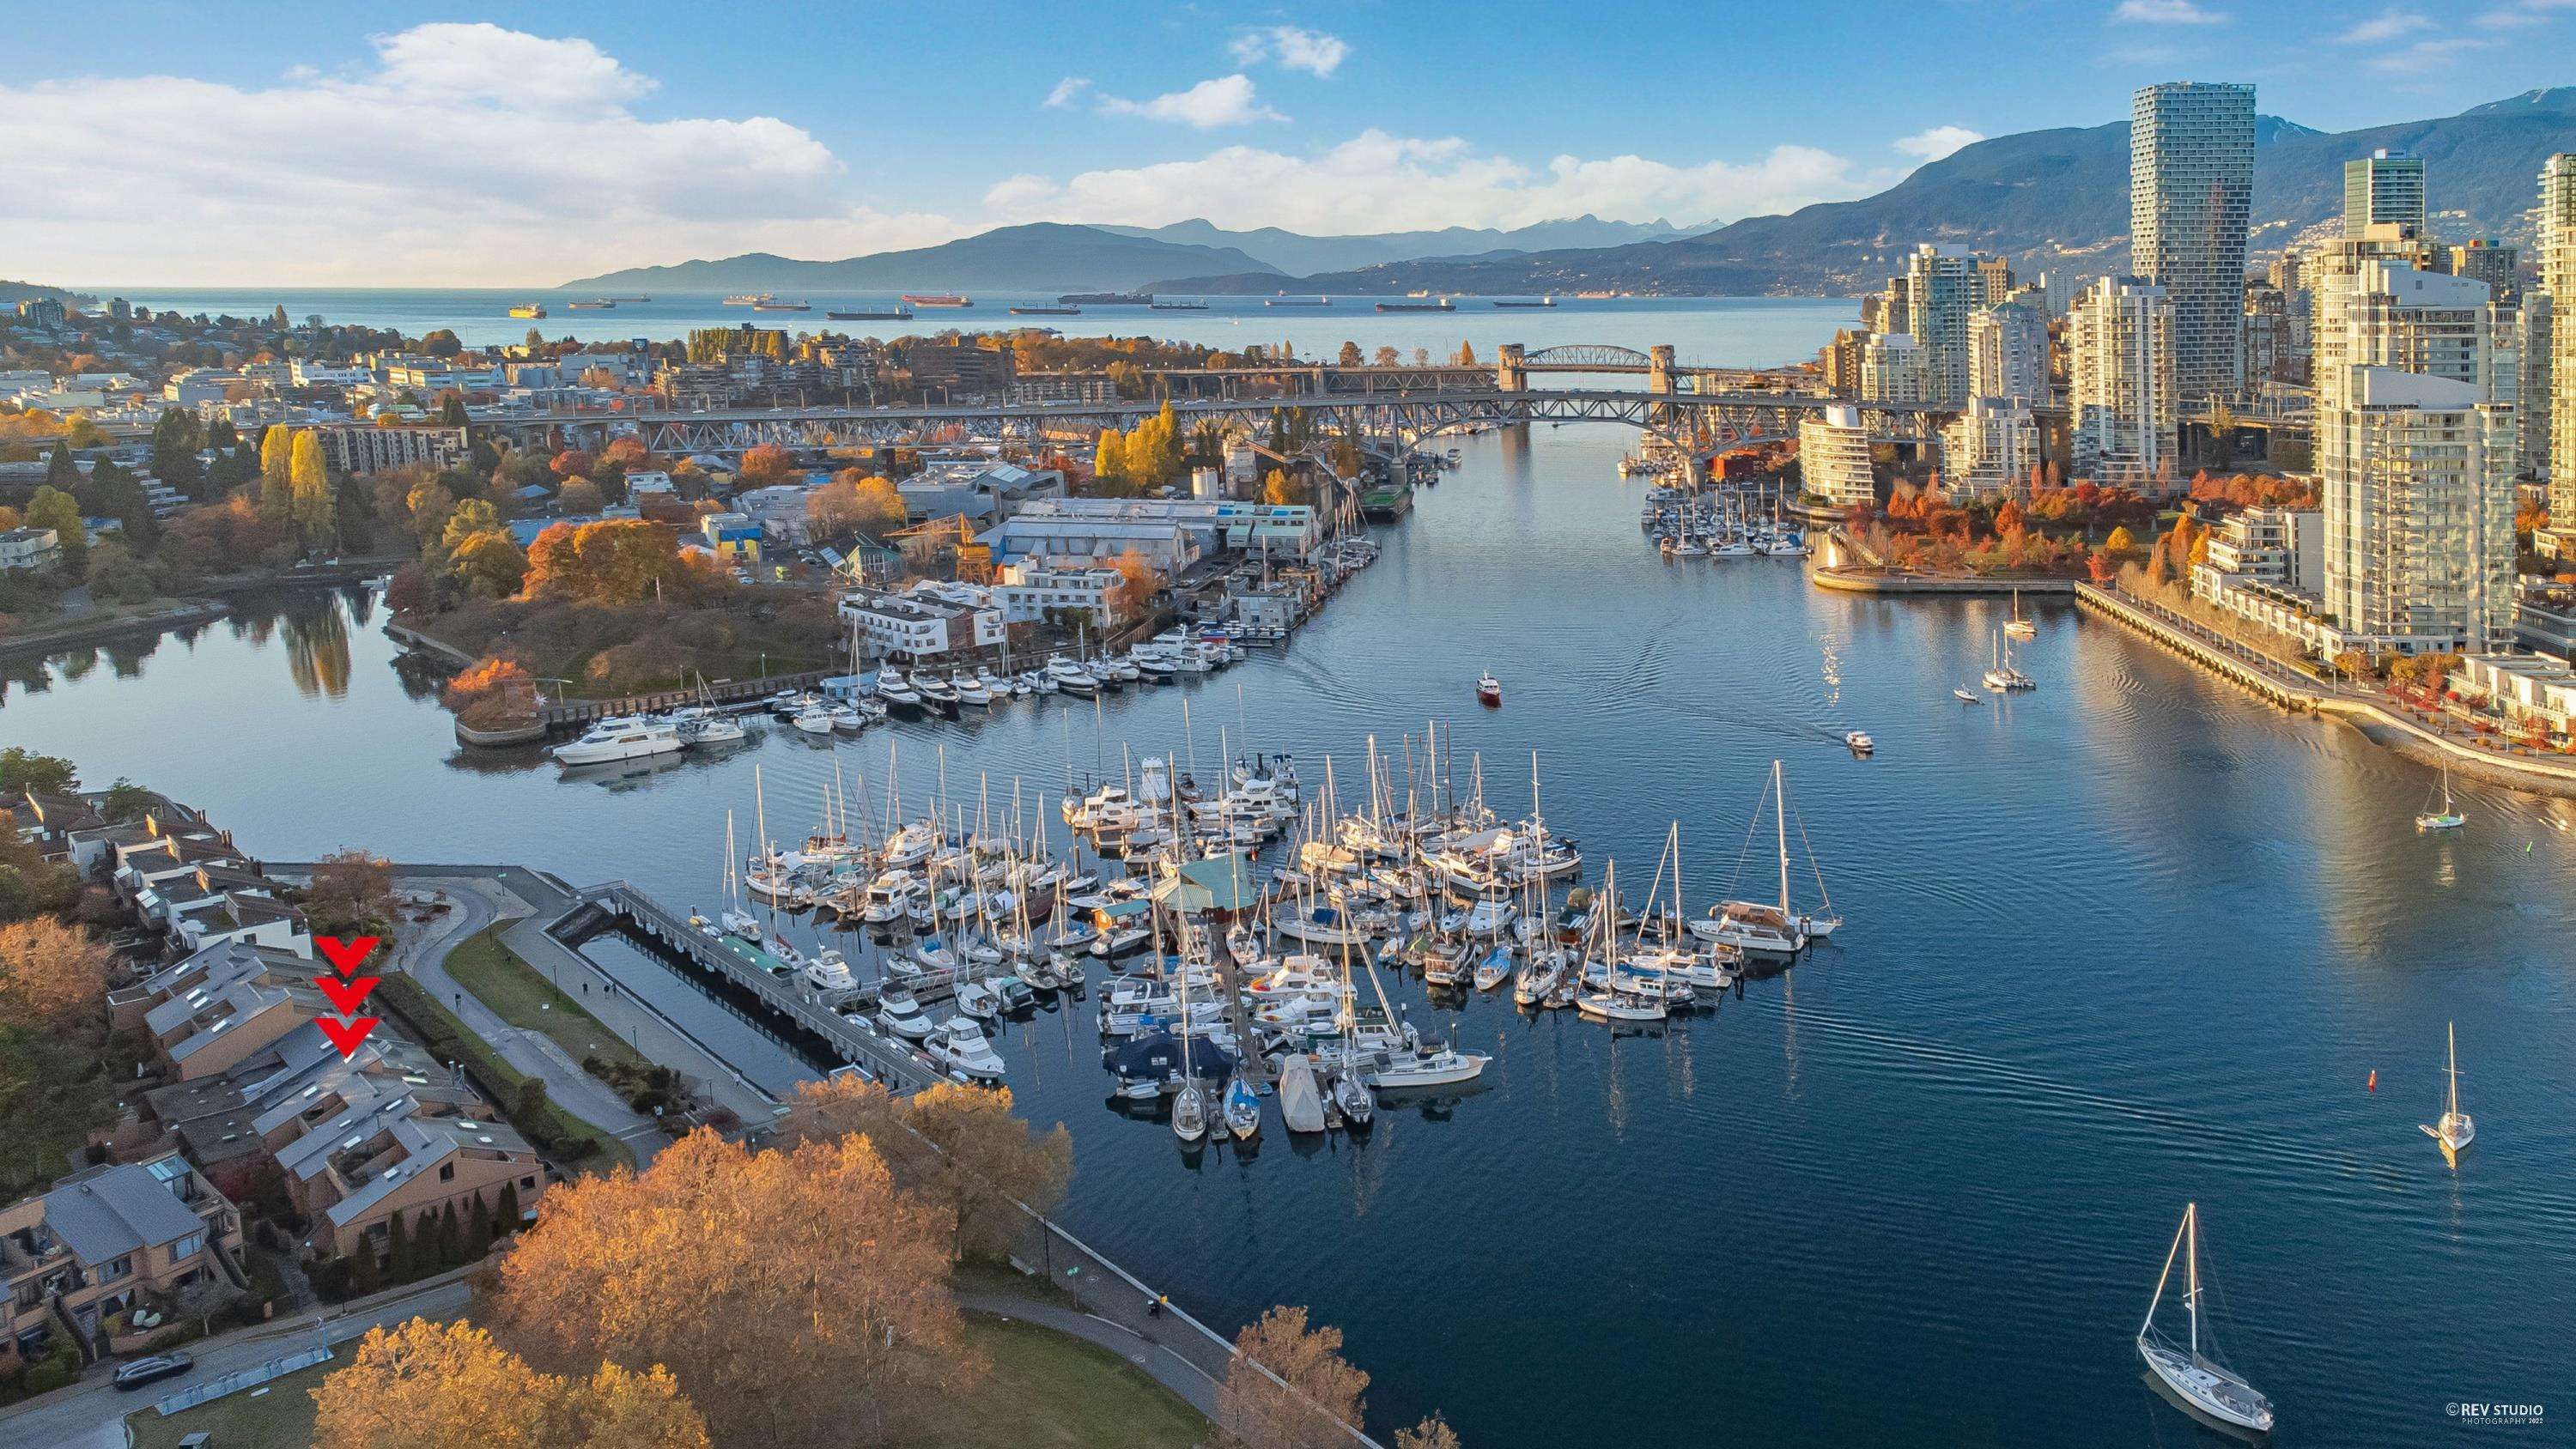 Open House. Open House on Saturday, November 5, 2022 2:00PM - 4:00PM
WATERFRONT TOWNHOUSE w/ stunning water, marina, cityscape and mtn views. 180 degree views W out to English Bay sunsets and E to the Cambie St. Bridge sunrises. Renovation by Colbrone Arc